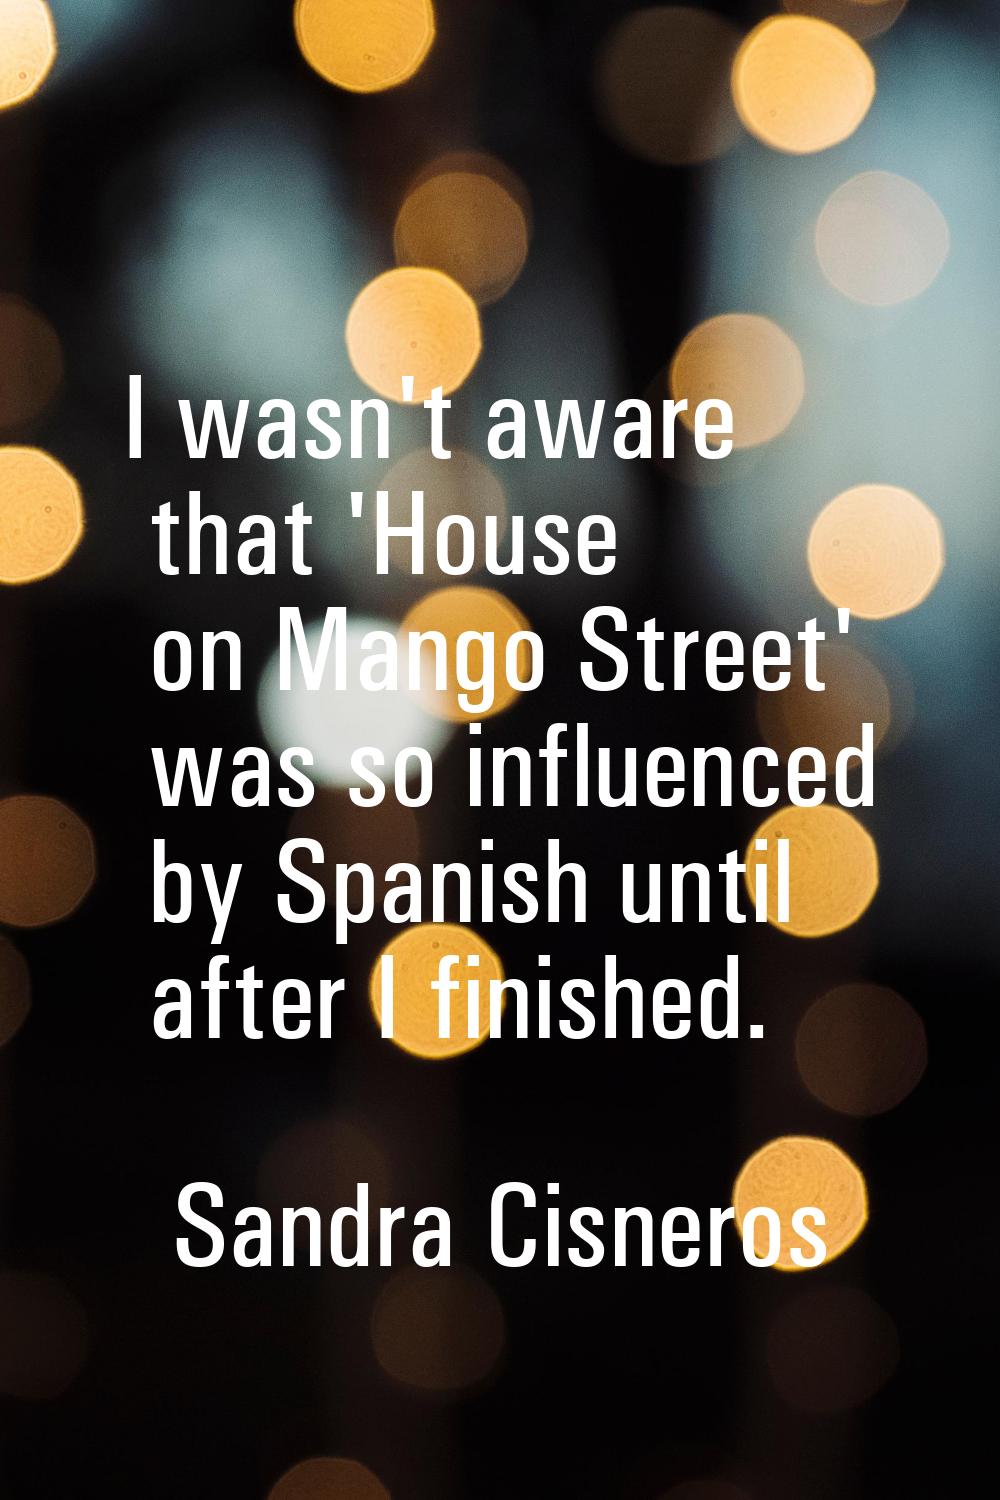 I wasn't aware that 'House on Mango Street' was so influenced by Spanish until after I finished.